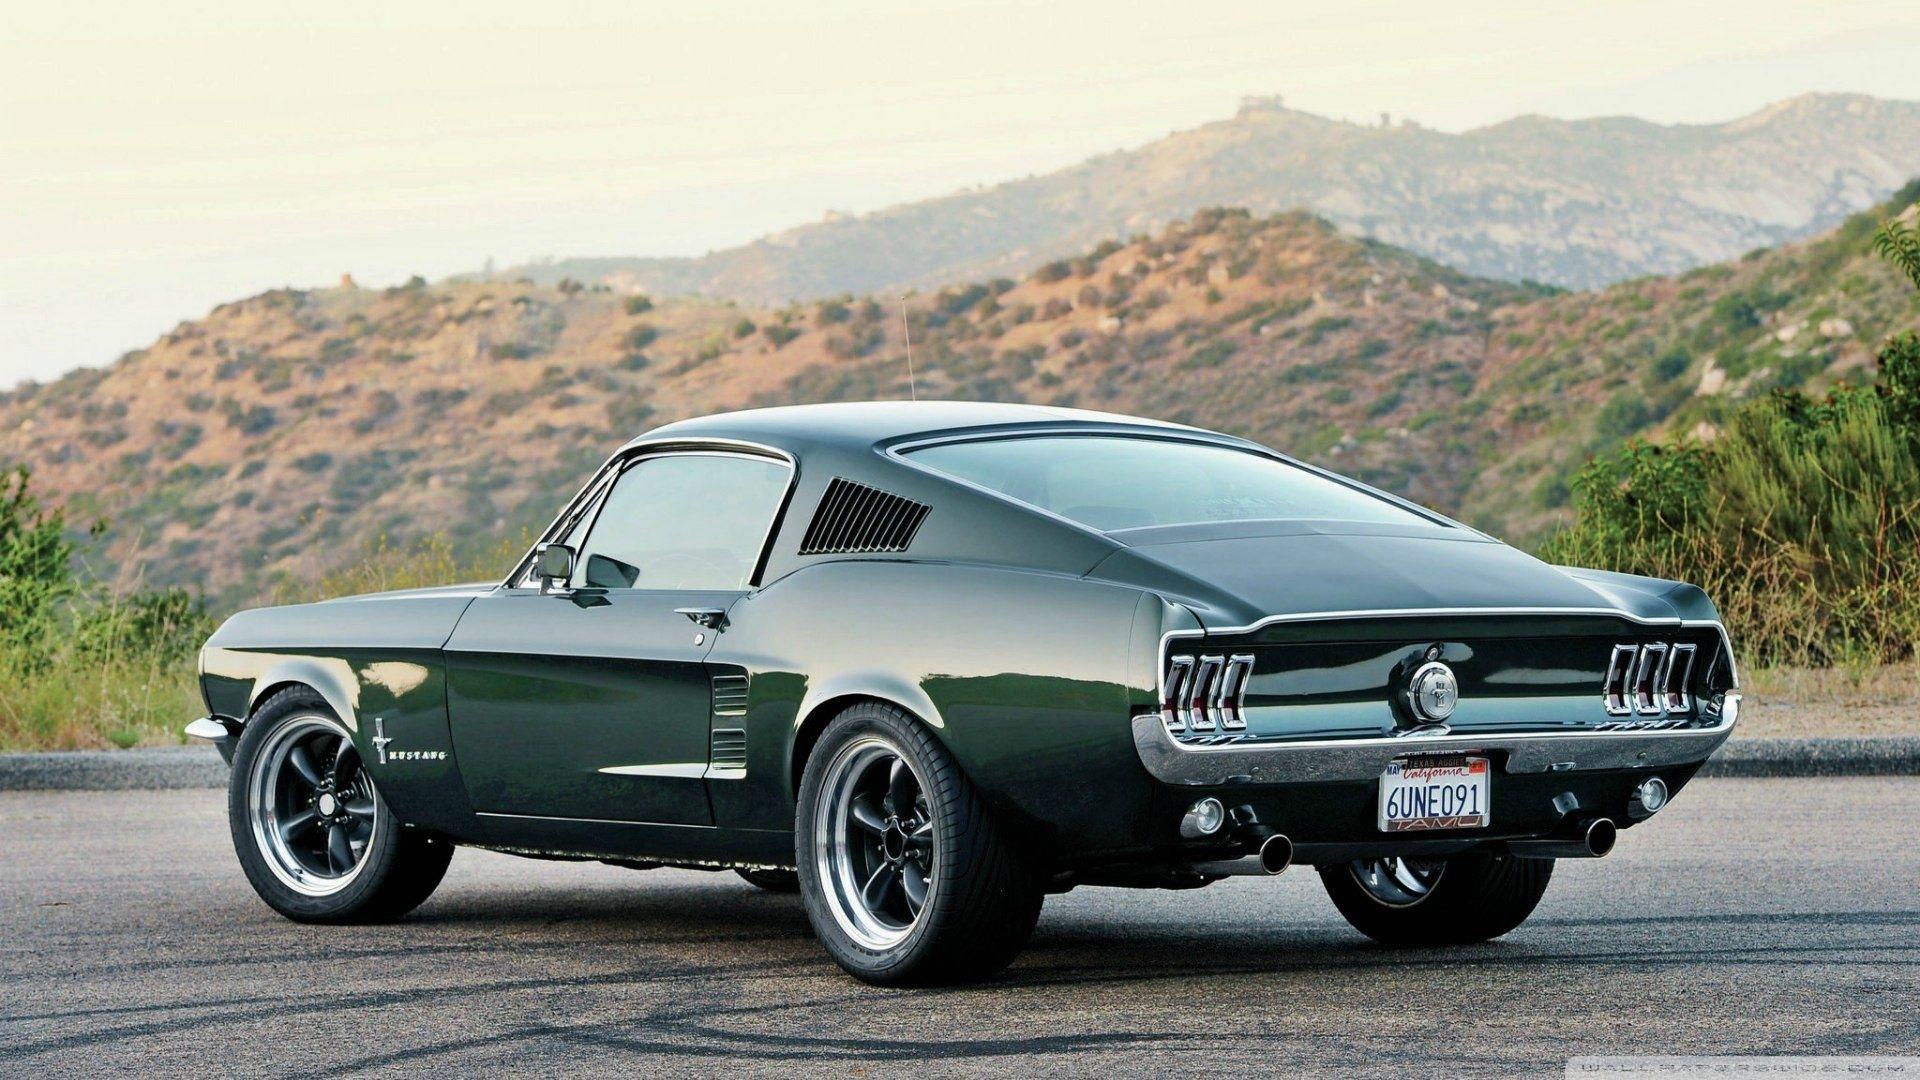 Ford Mustang Fastback Wallpaper 1 X 1080